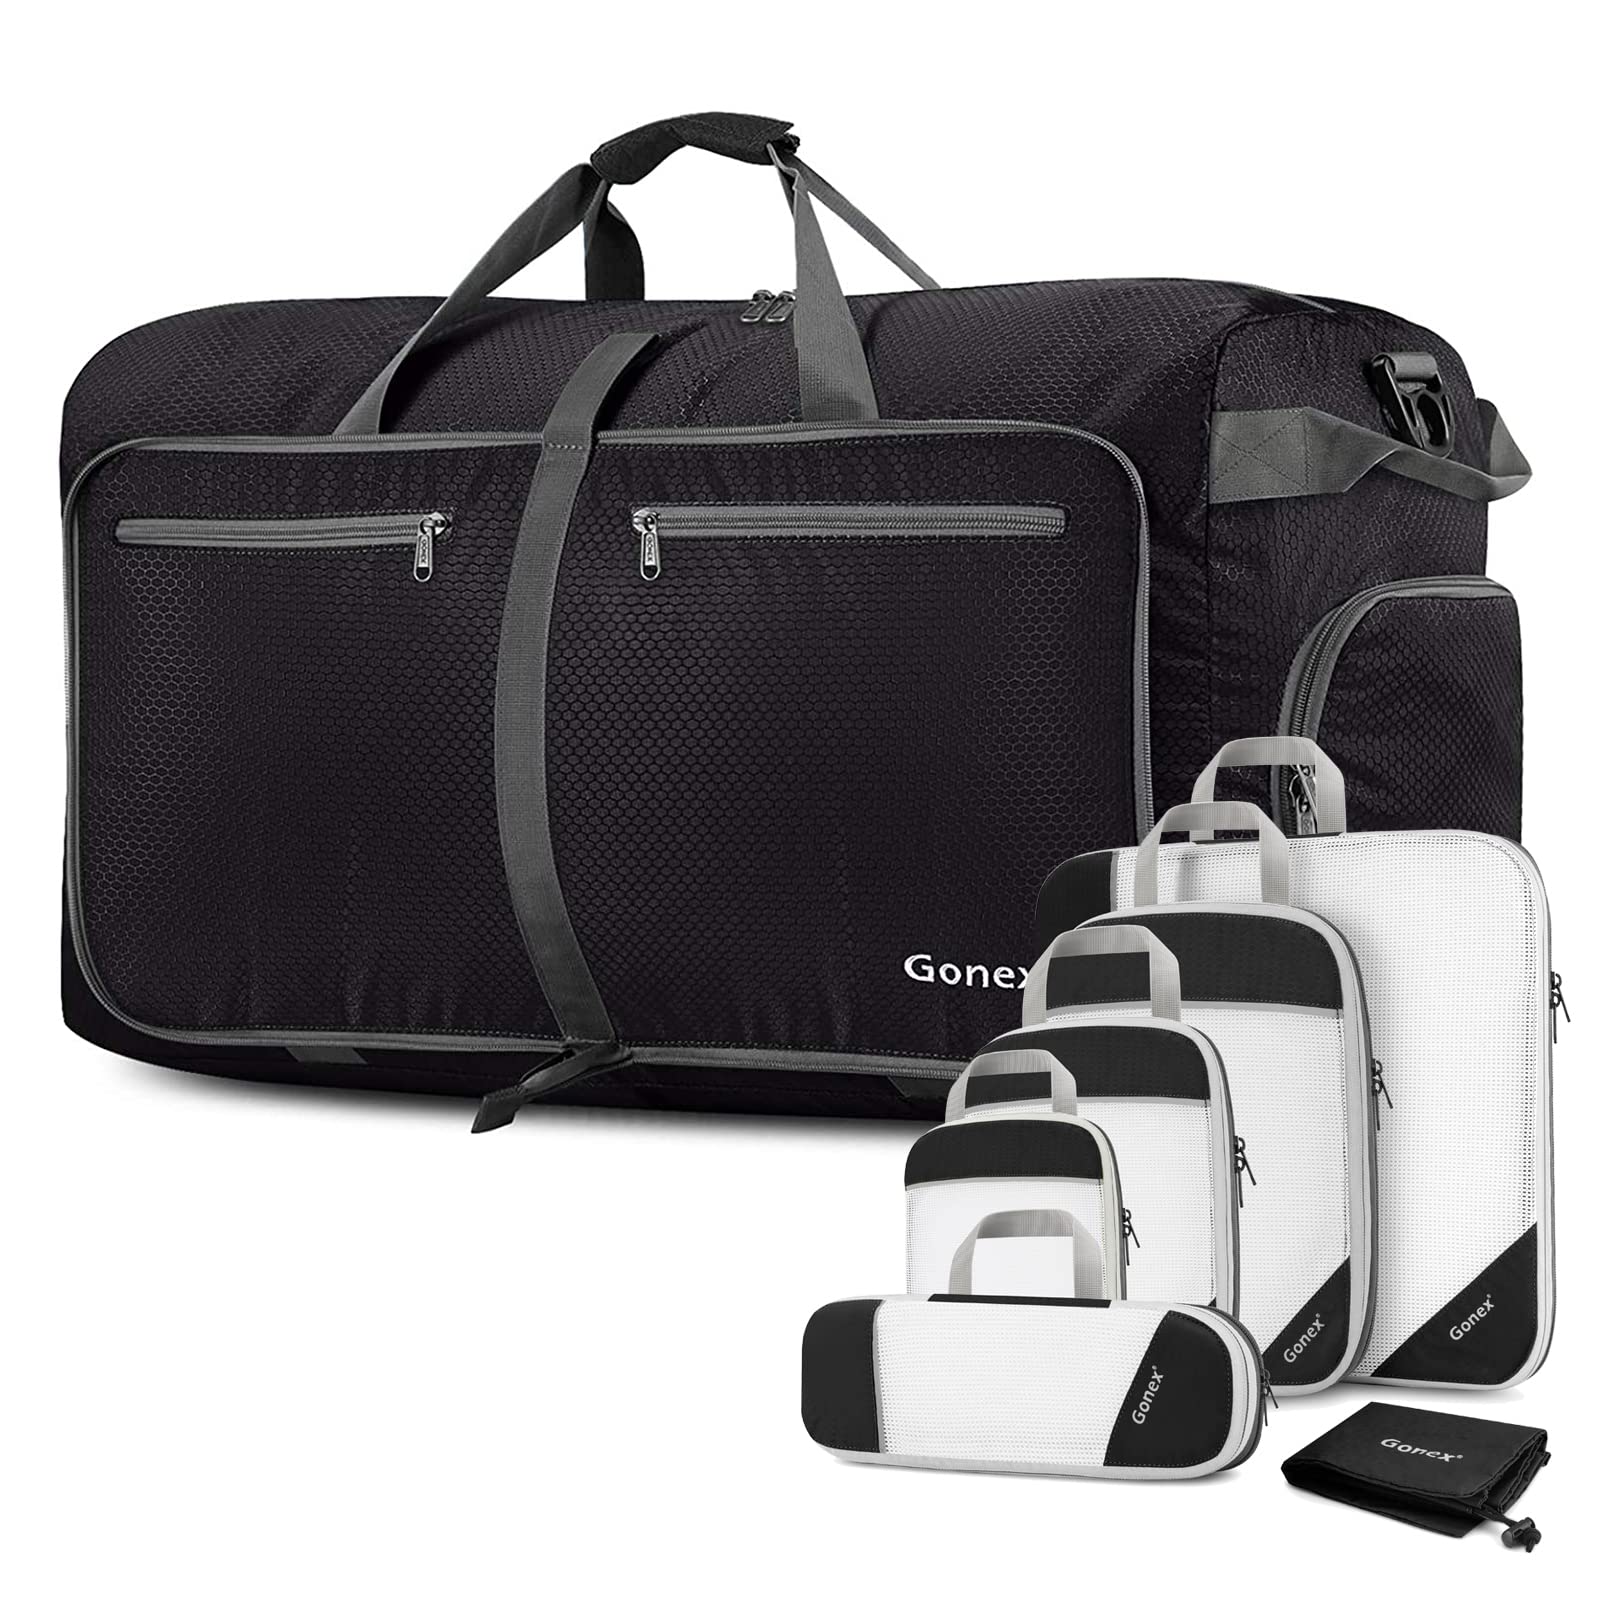 A set of black and white travel bags in various sizes, featuring the Gonex 150L Duffel Bag with Compression Cubes, smaller cases, and pouches.